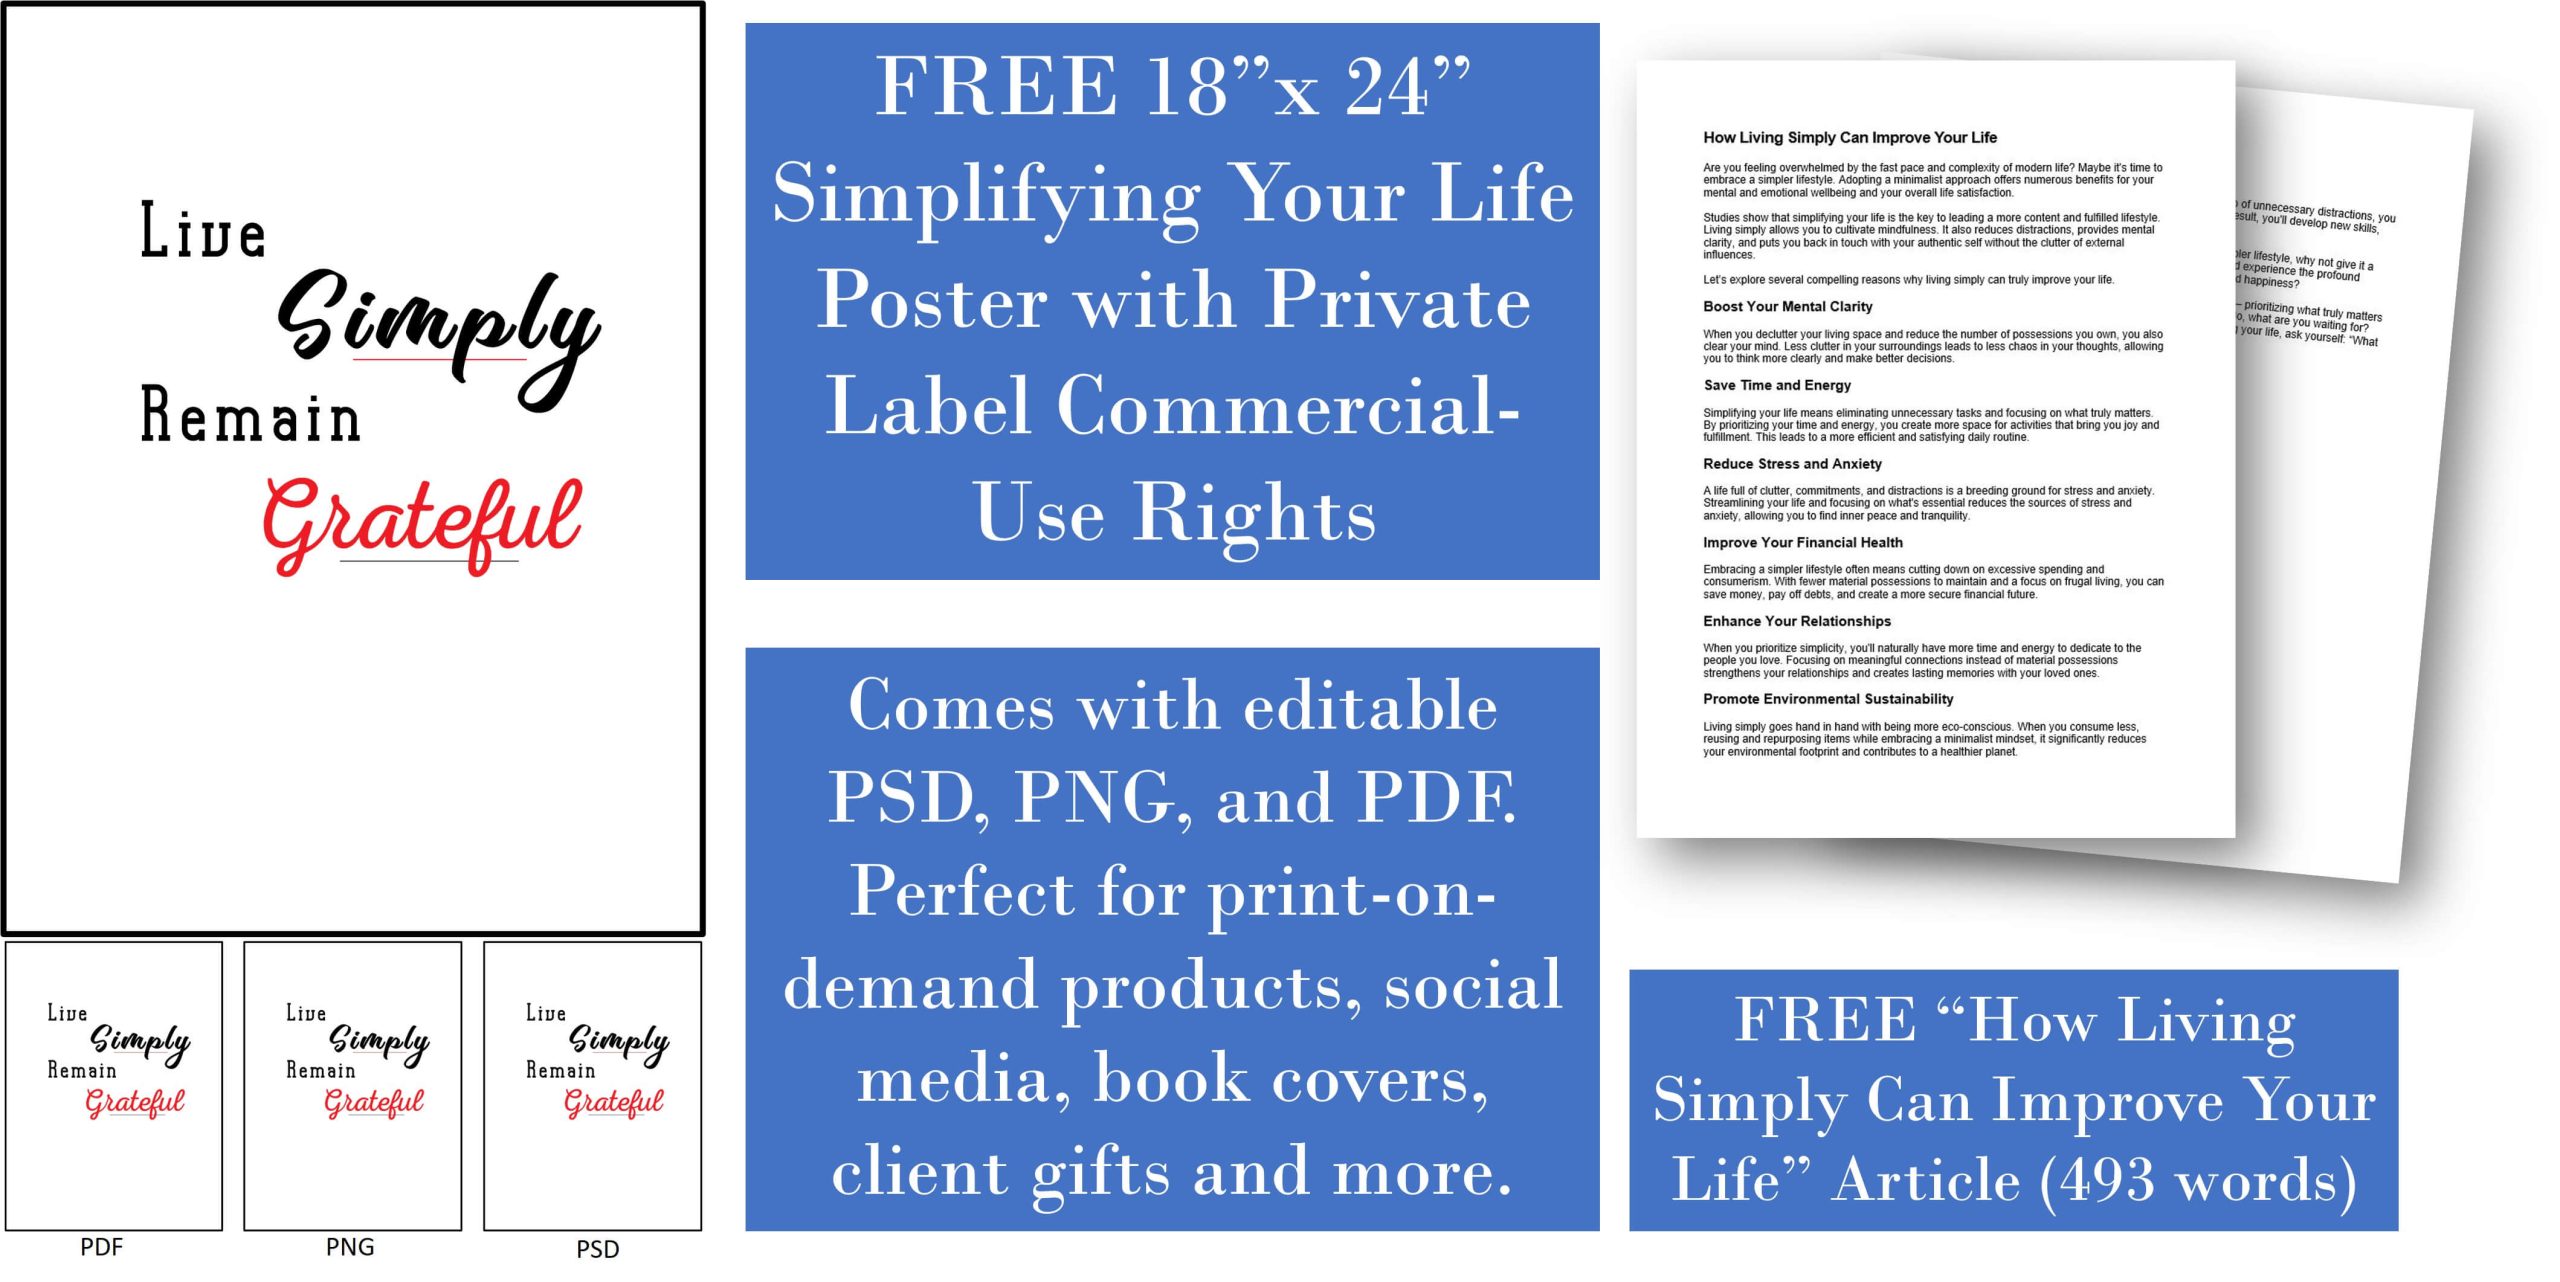 Free Simplifying Your Life Article and Poster PLR